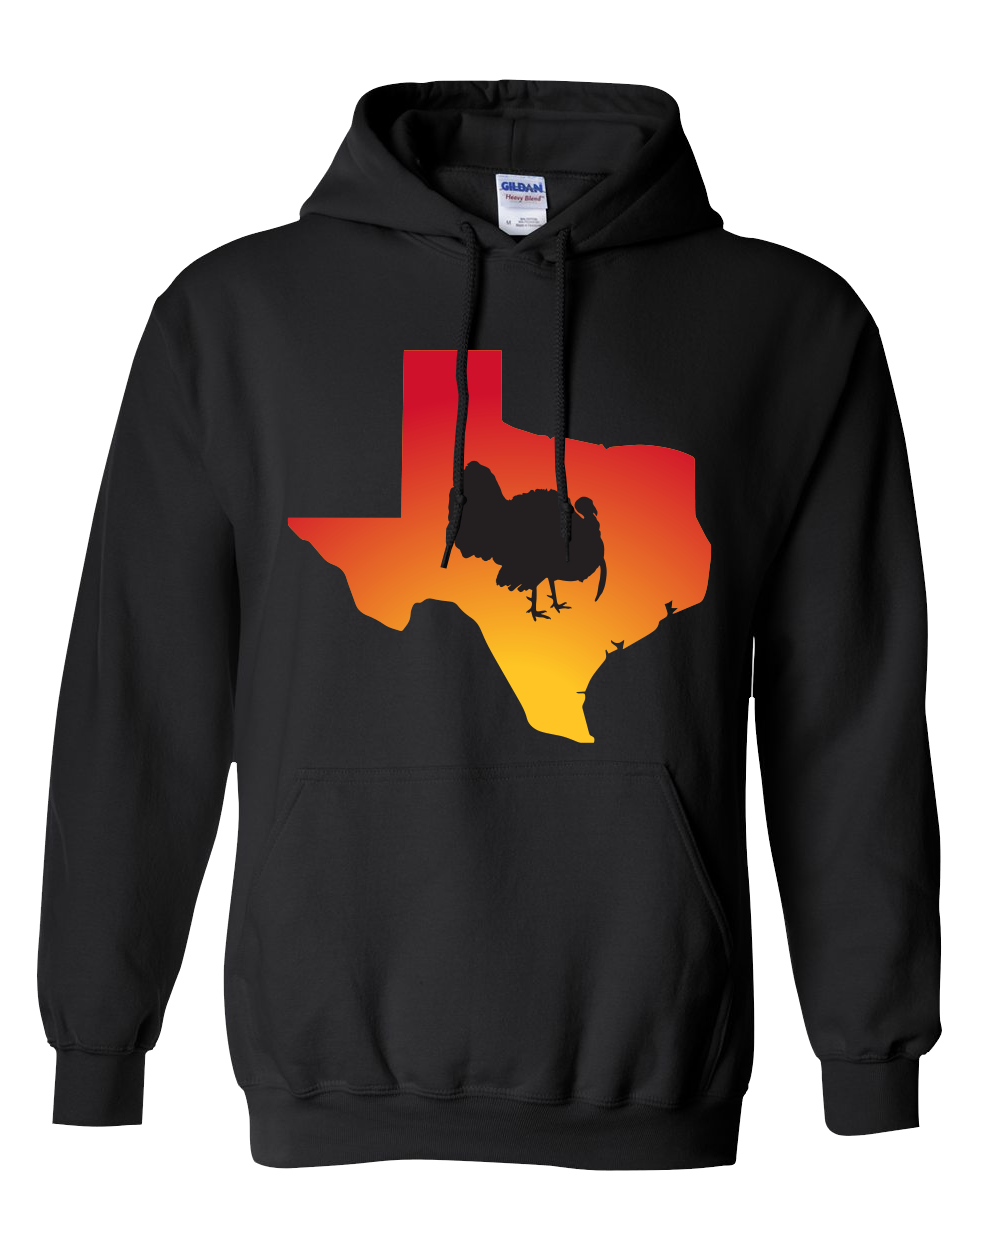 Pullover Hooded Sweatshirt Texas Black Turkey Vibrant Design High Quality Tight Knit Ring Spun Low Maintenance Cotton Printed With The Newest Available Color Transfer Technology